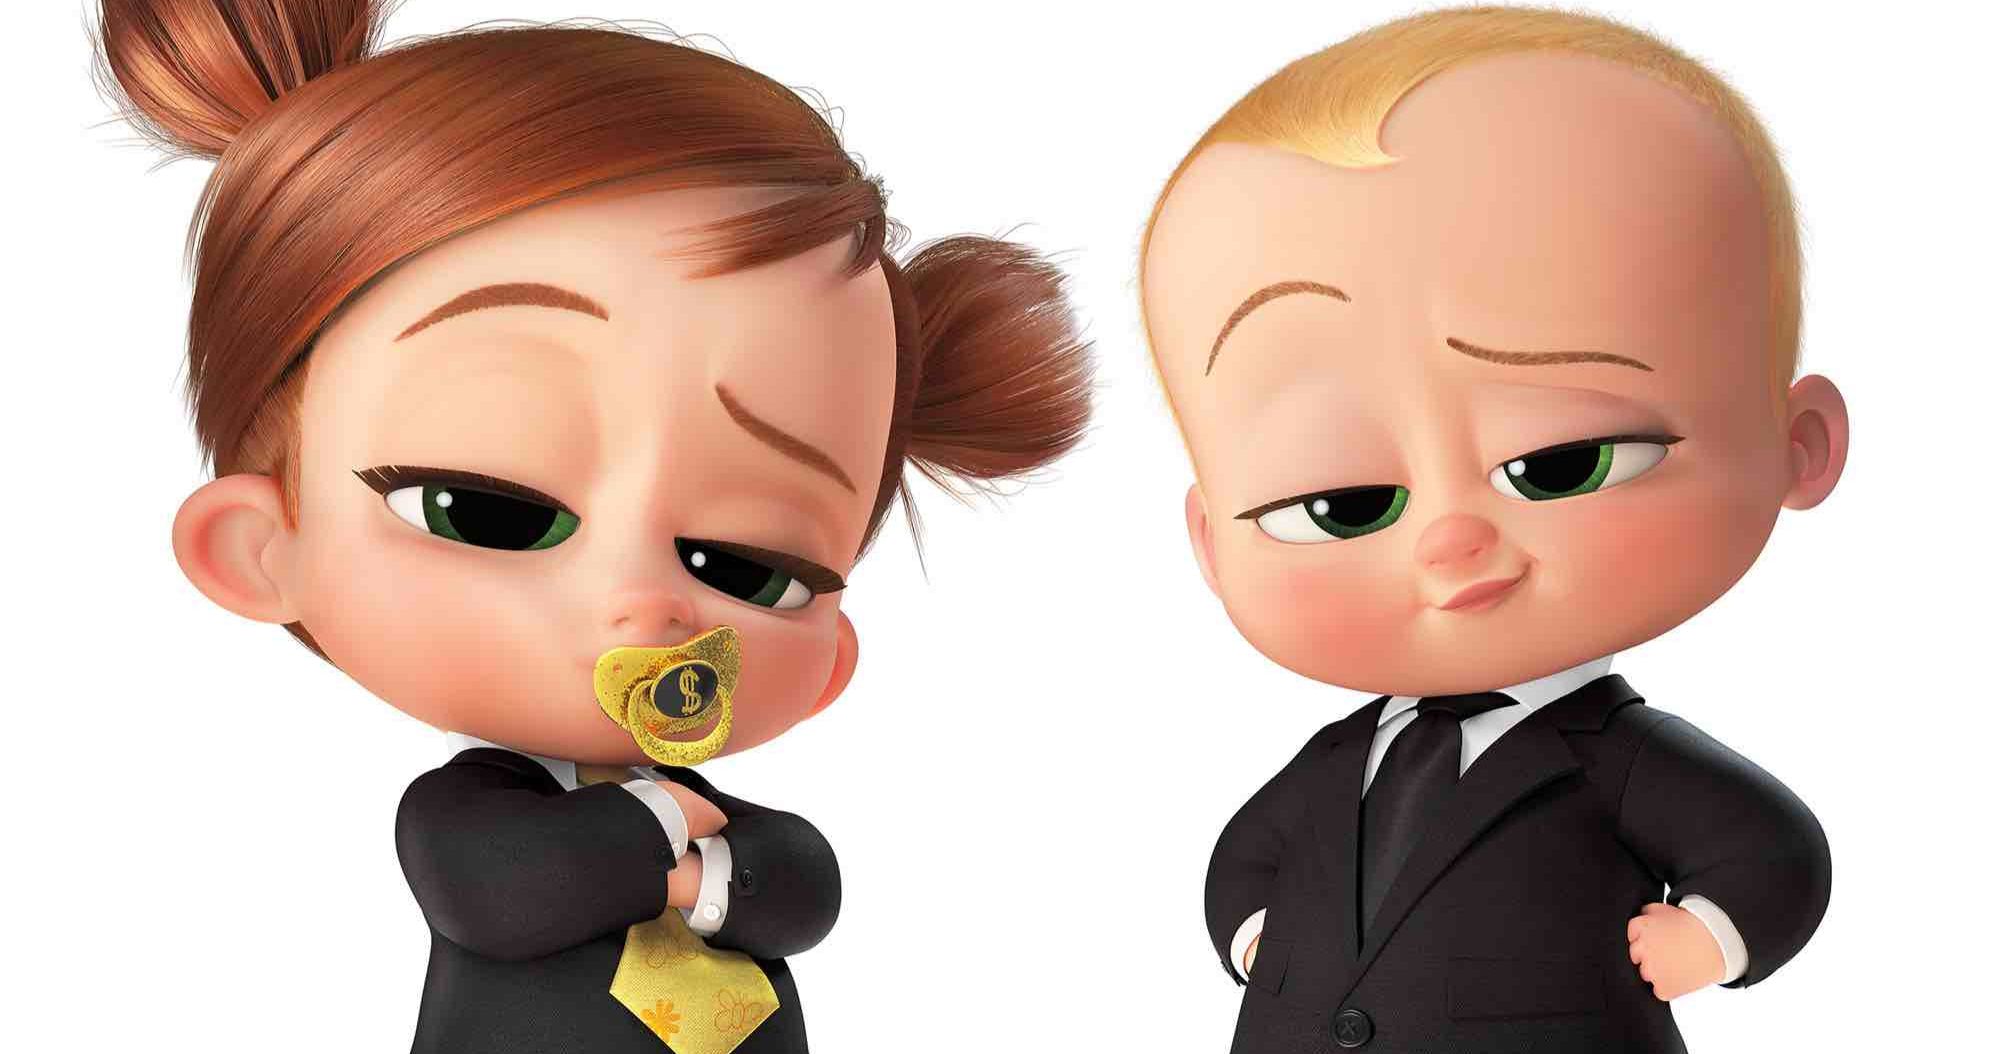 The Boss Baby 2 Hits Theaters and Streaming on Peacock Today